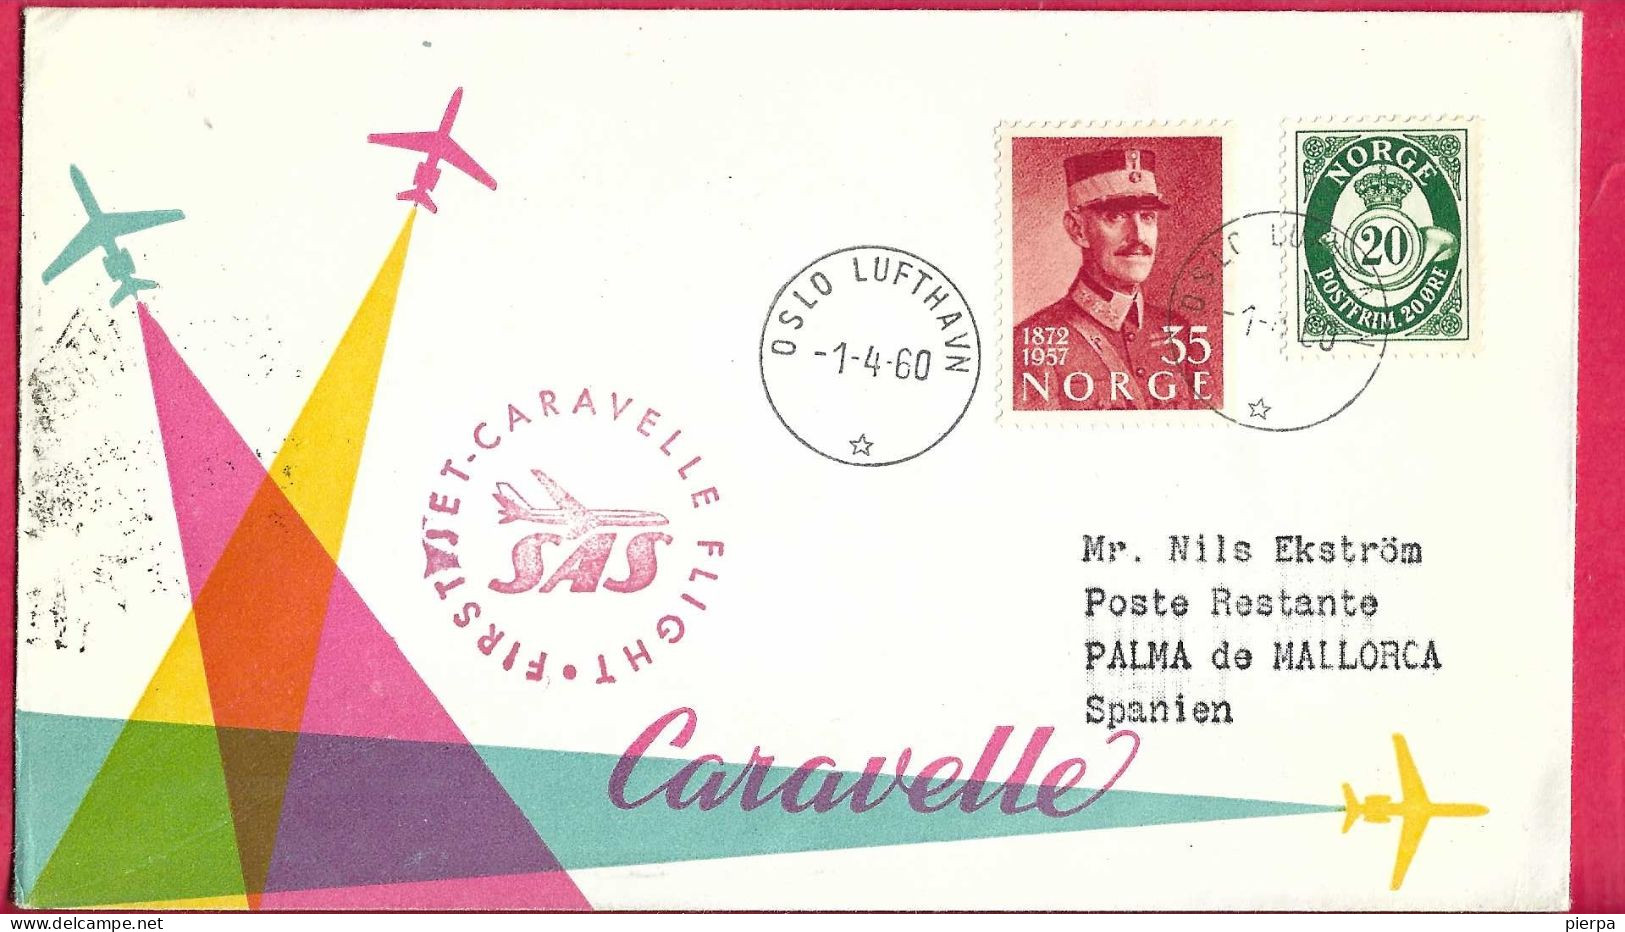 NORGE - FIRST CARAVELLE FLIGHT - SAS - FROM OSLO TO PALMA DE MALLORCA *1.4.60* ON OFFICIAL COVER - Covers & Documents